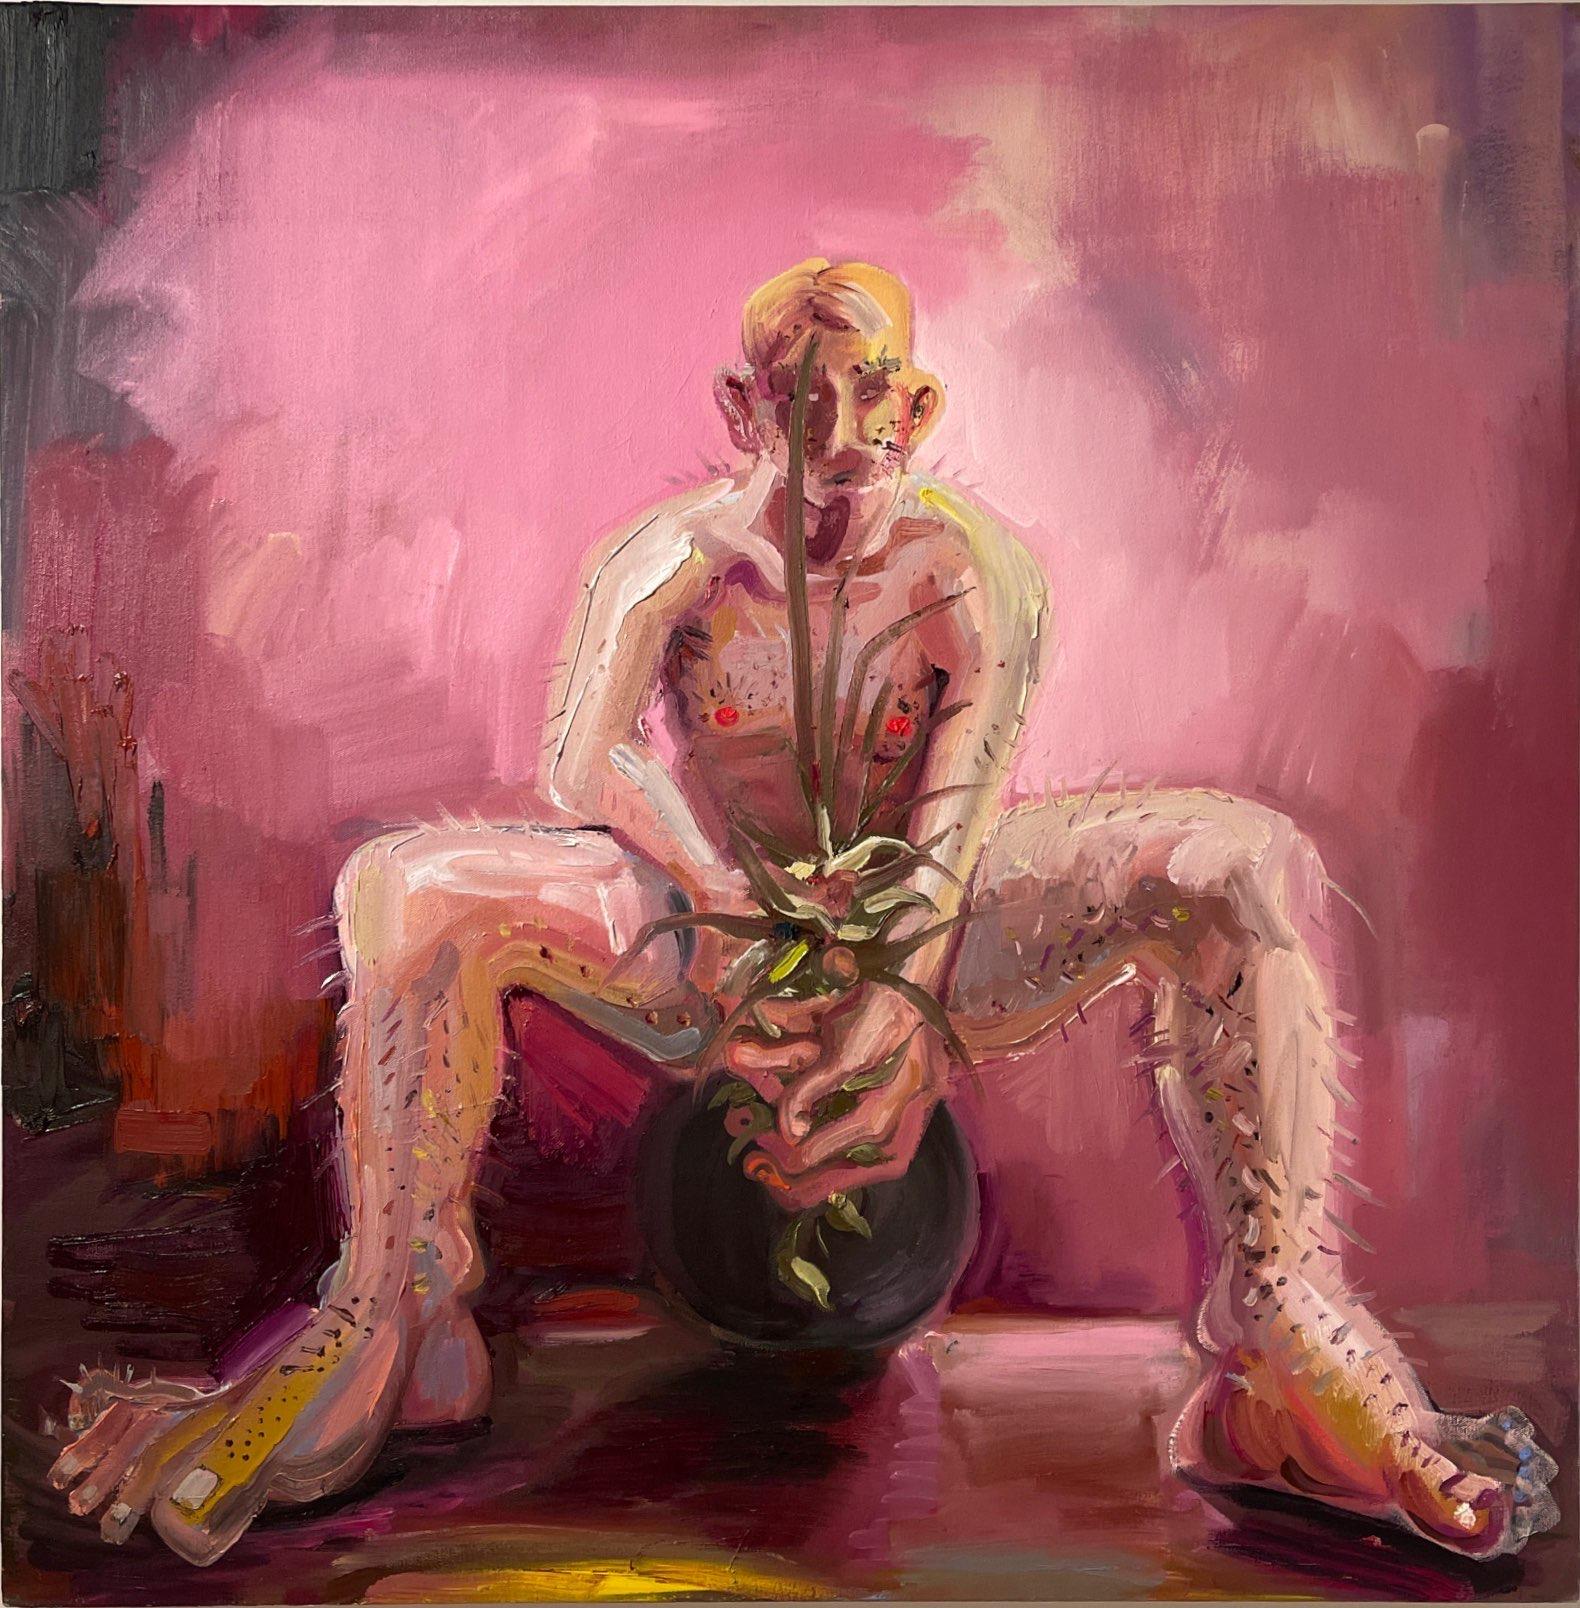 Man With a Plant is a contemporary figurative painting by Angela China. It features a nude man holding a plant while sitting on a ball. The plant strategically gives him privacy. The man's legs and feet are purposefully large to create a warped